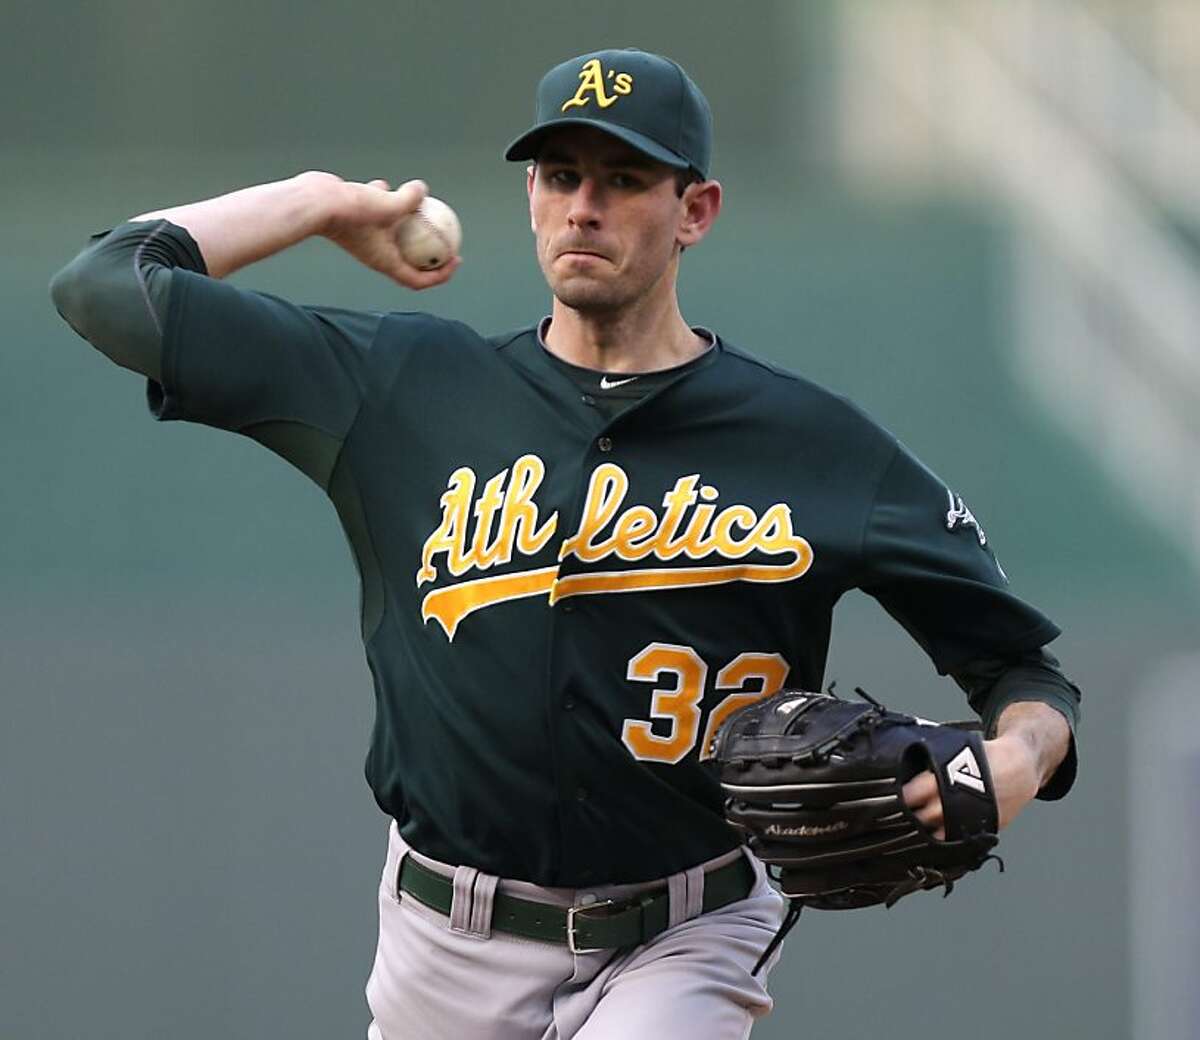 KANSAS CITY, MO - AUGUST 15: Brandon McCarthy #32 of the Oakland Athletics warms up during a game against the Kansas City Royals in the first inning on August 15, 2012 at Kauffman Stadium in Kansas City, Missouri. (Photo by Ed Zurga/Getty Images)